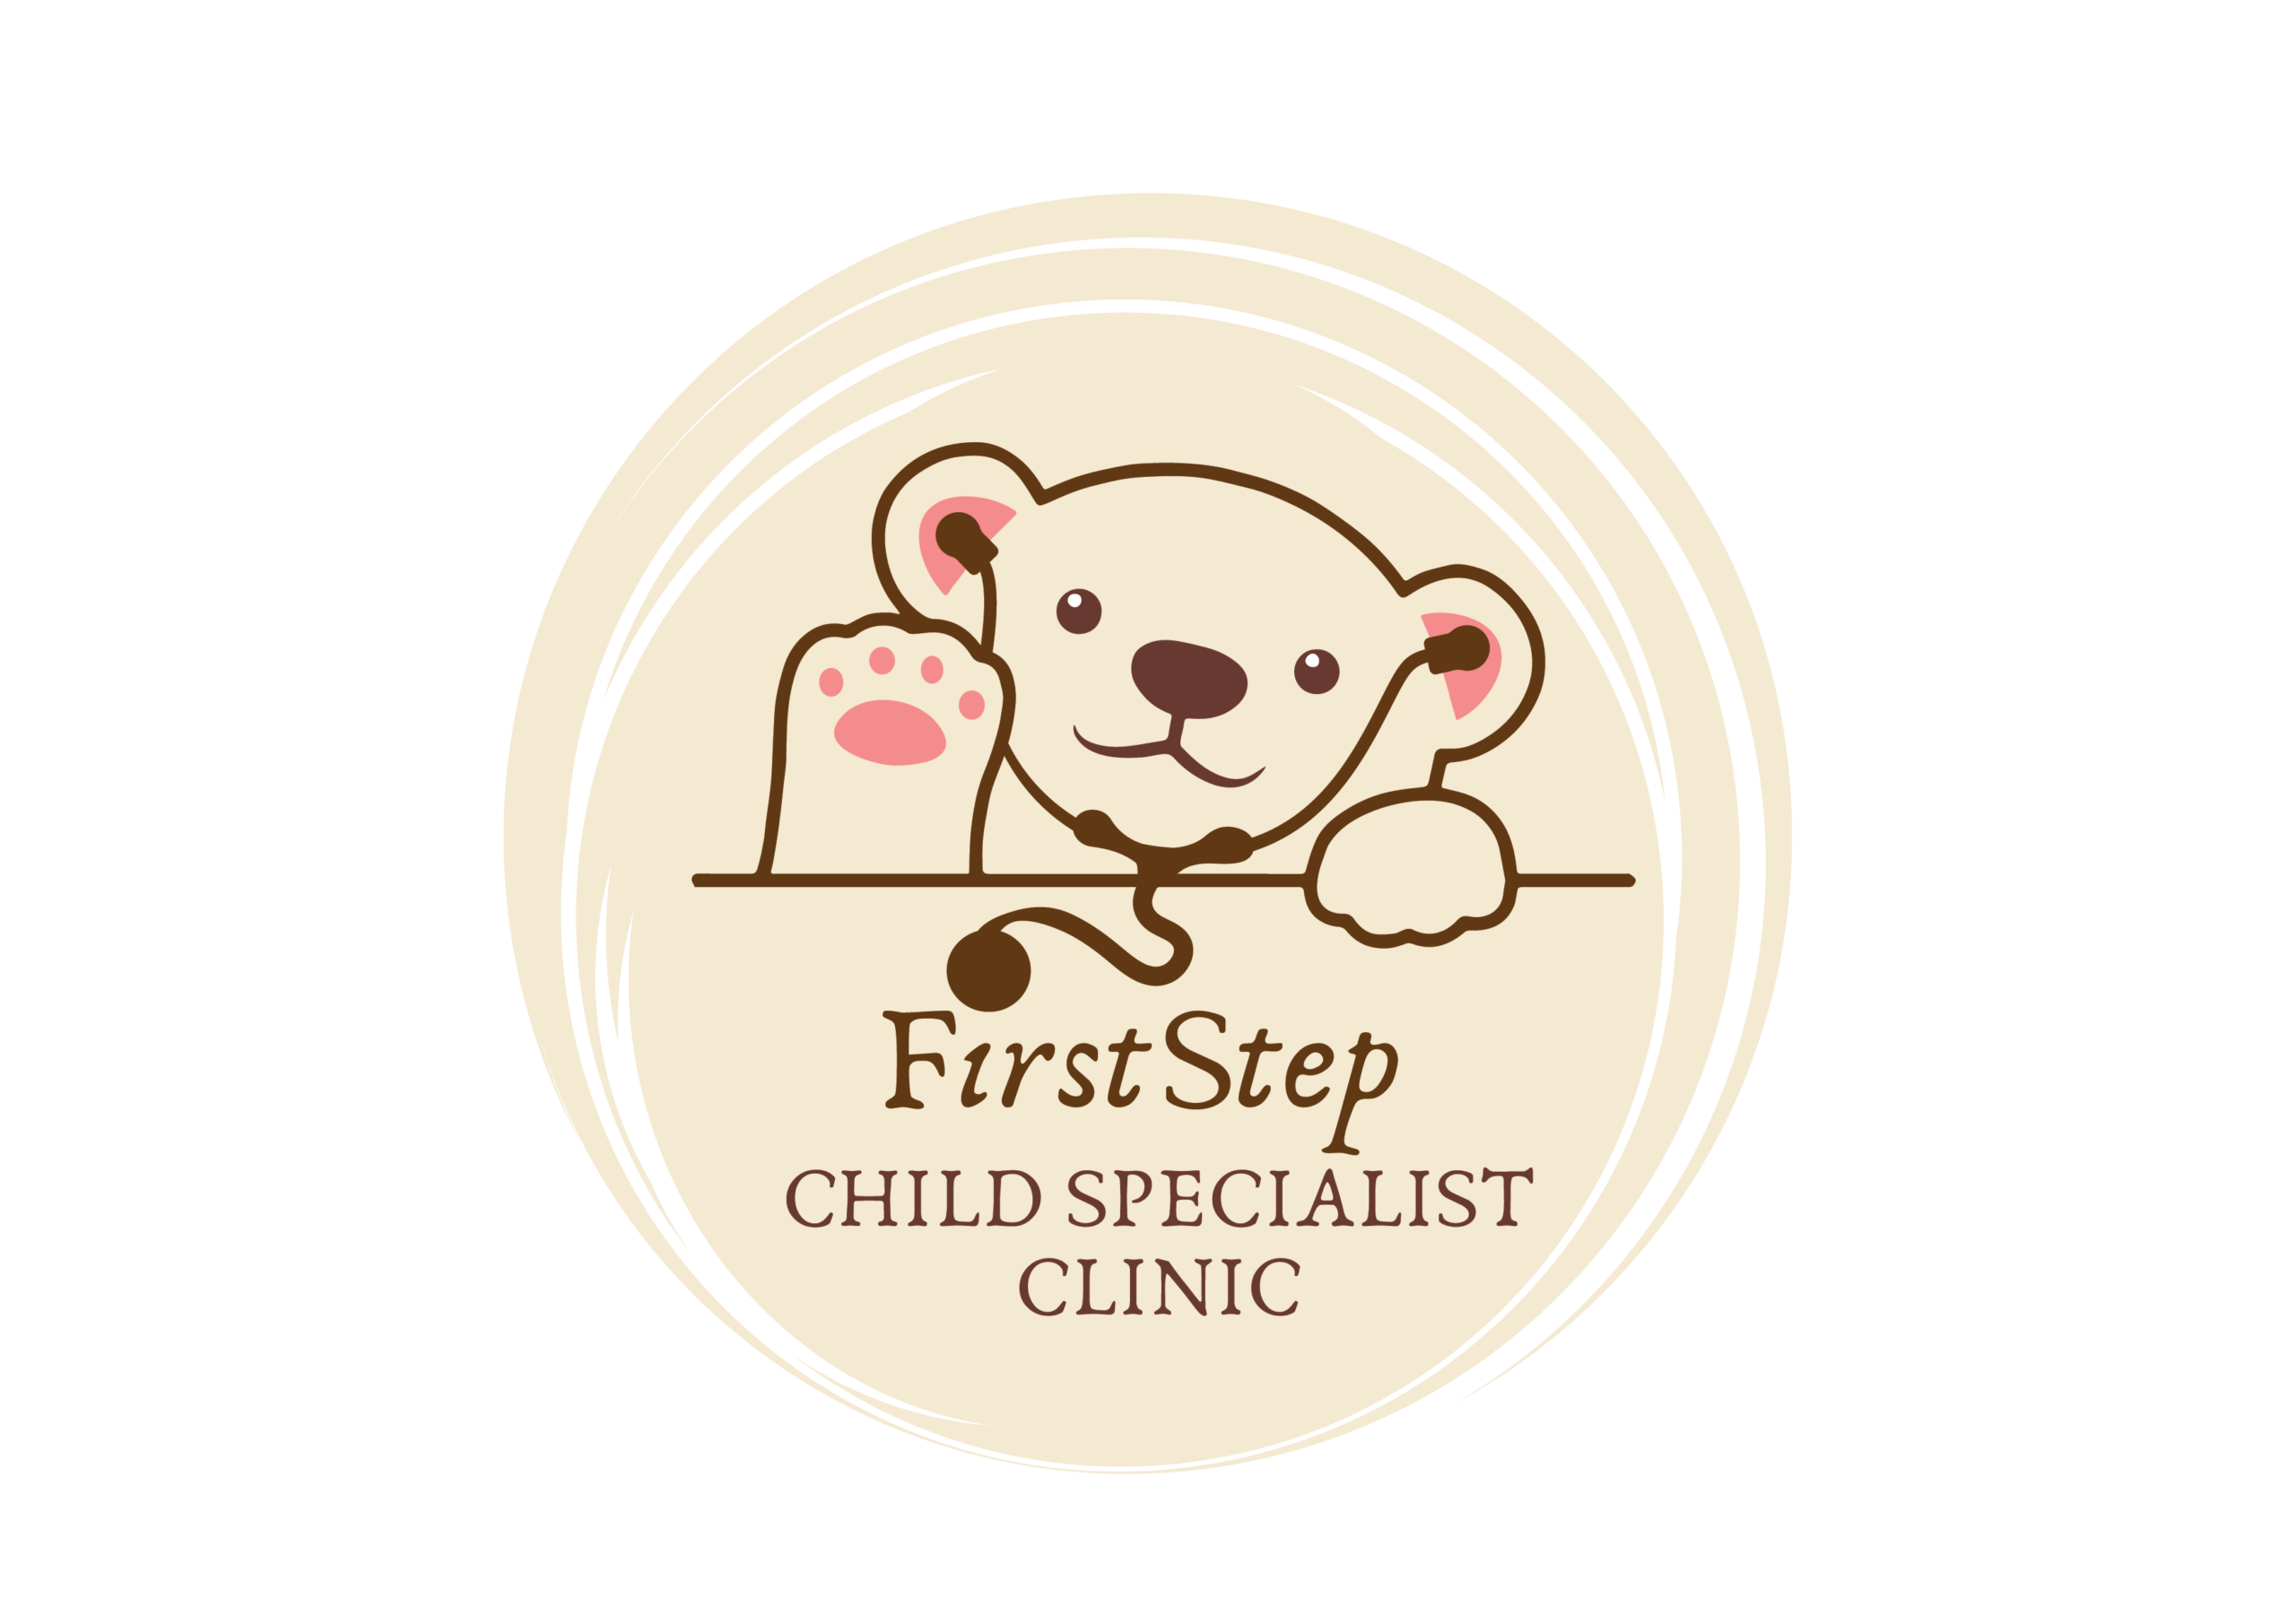 https://my.mncjobz.com/company/firststep-child-specialist-sdn-bhd